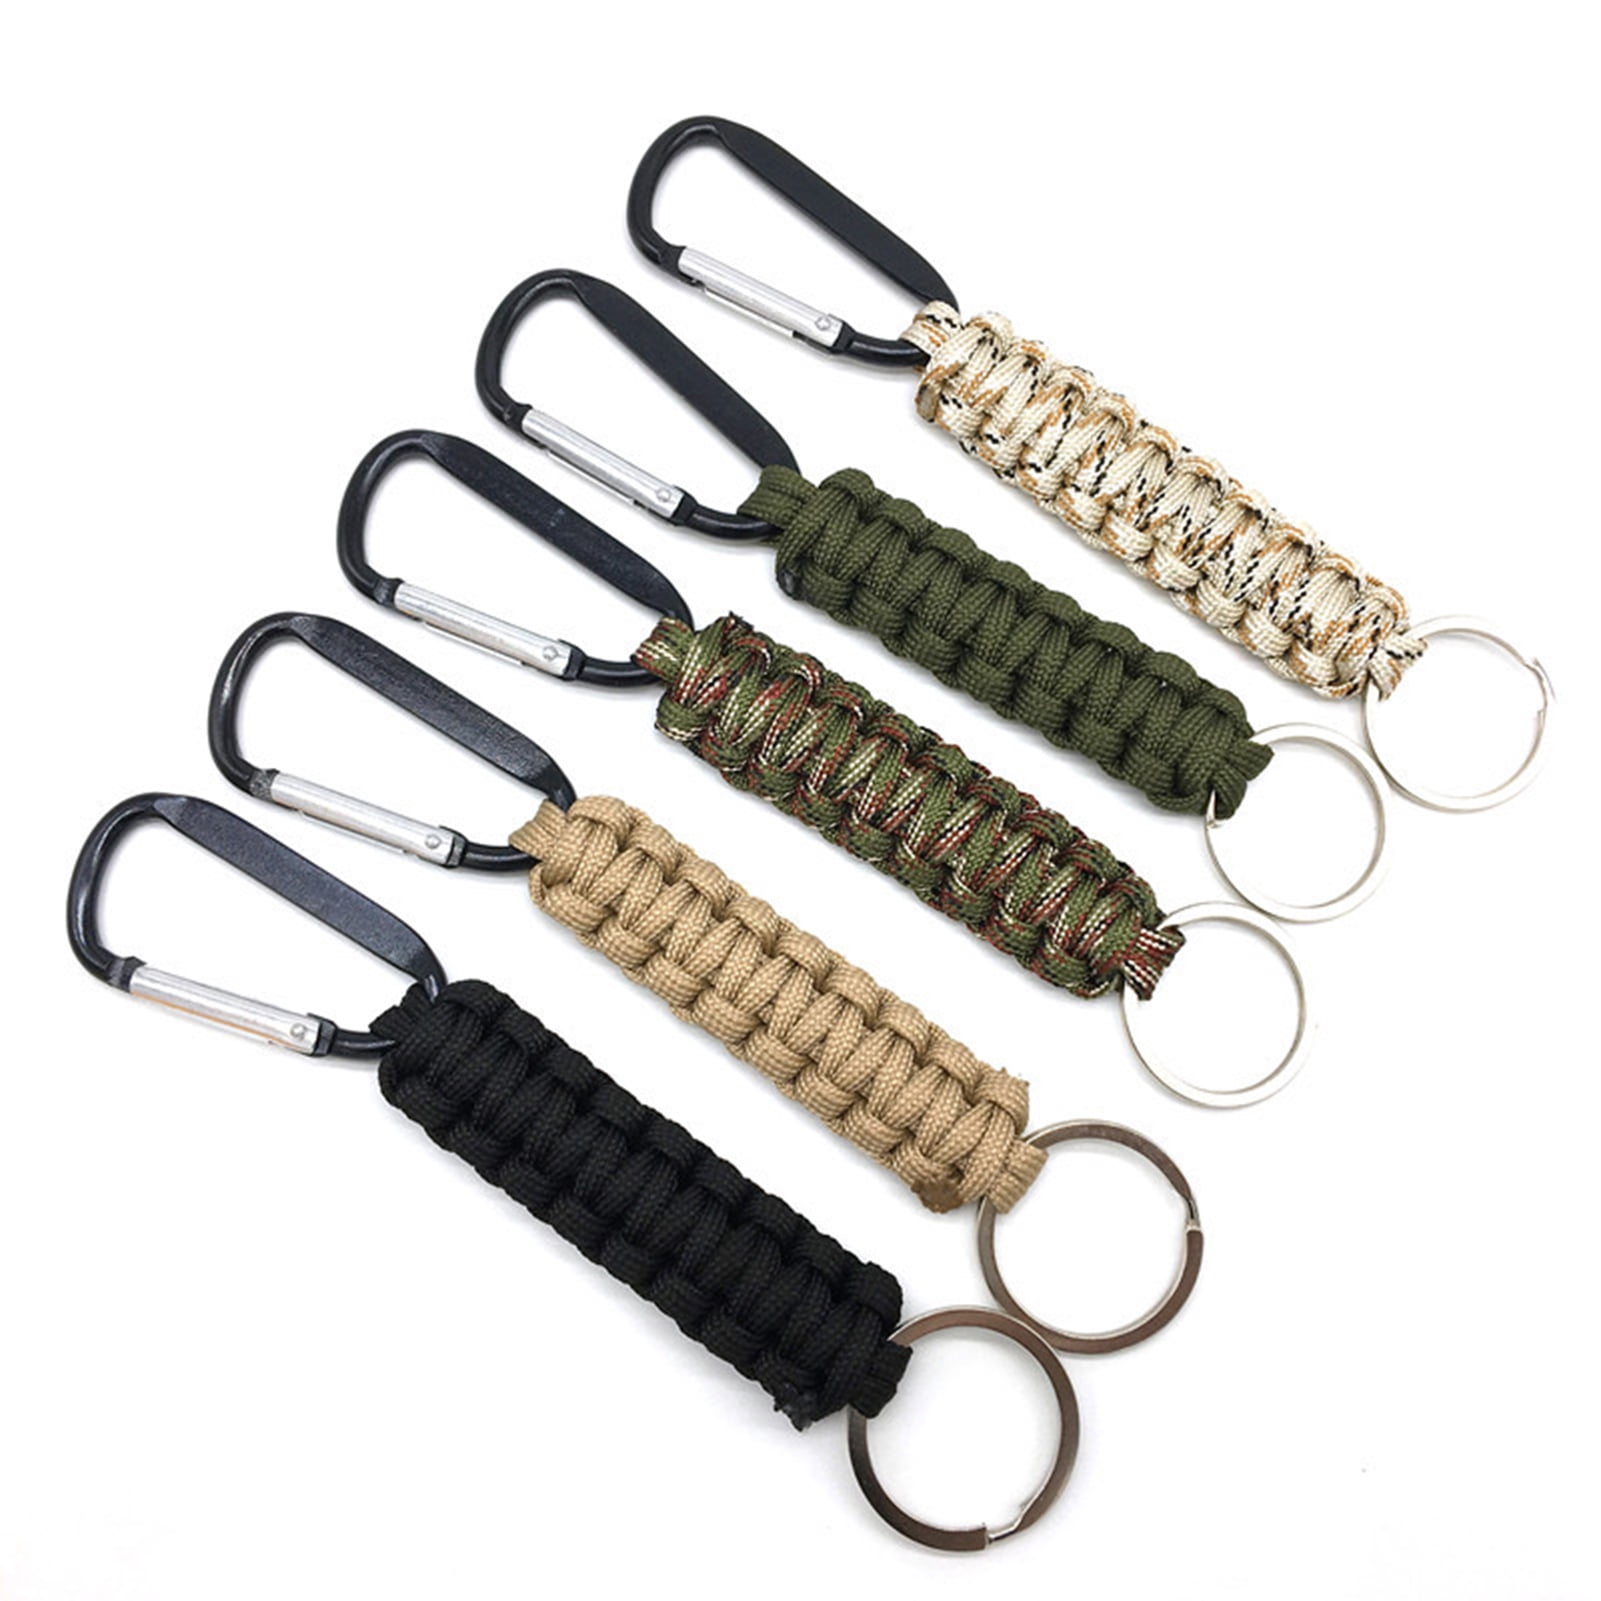 paracord keychain outdoor safety survival gear rope keyring carabiner kitsFEH 